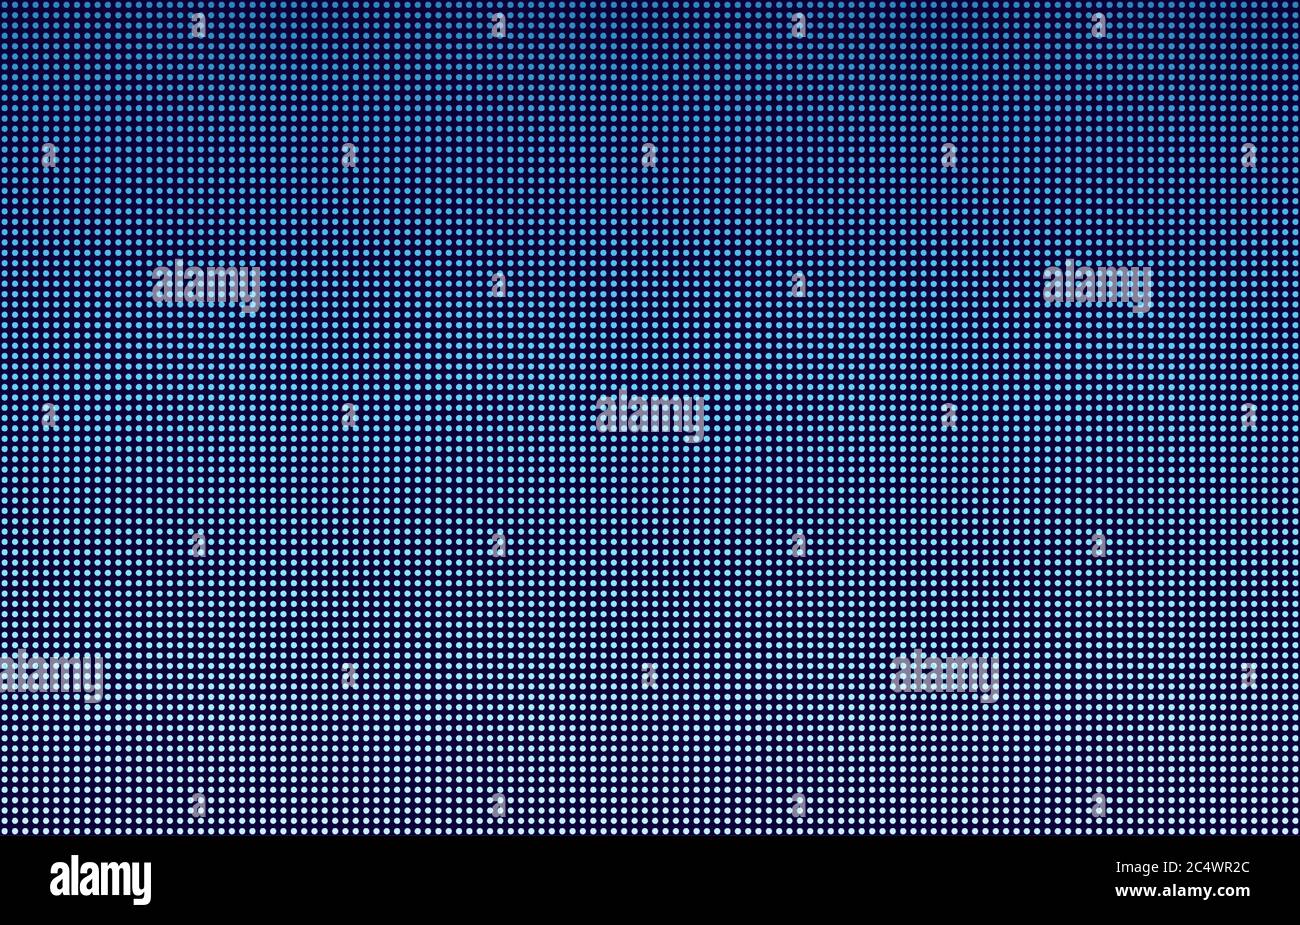 LED screen gradient background, blue monitor dots. Close-up of the macrotexture of the display. Stock Vector